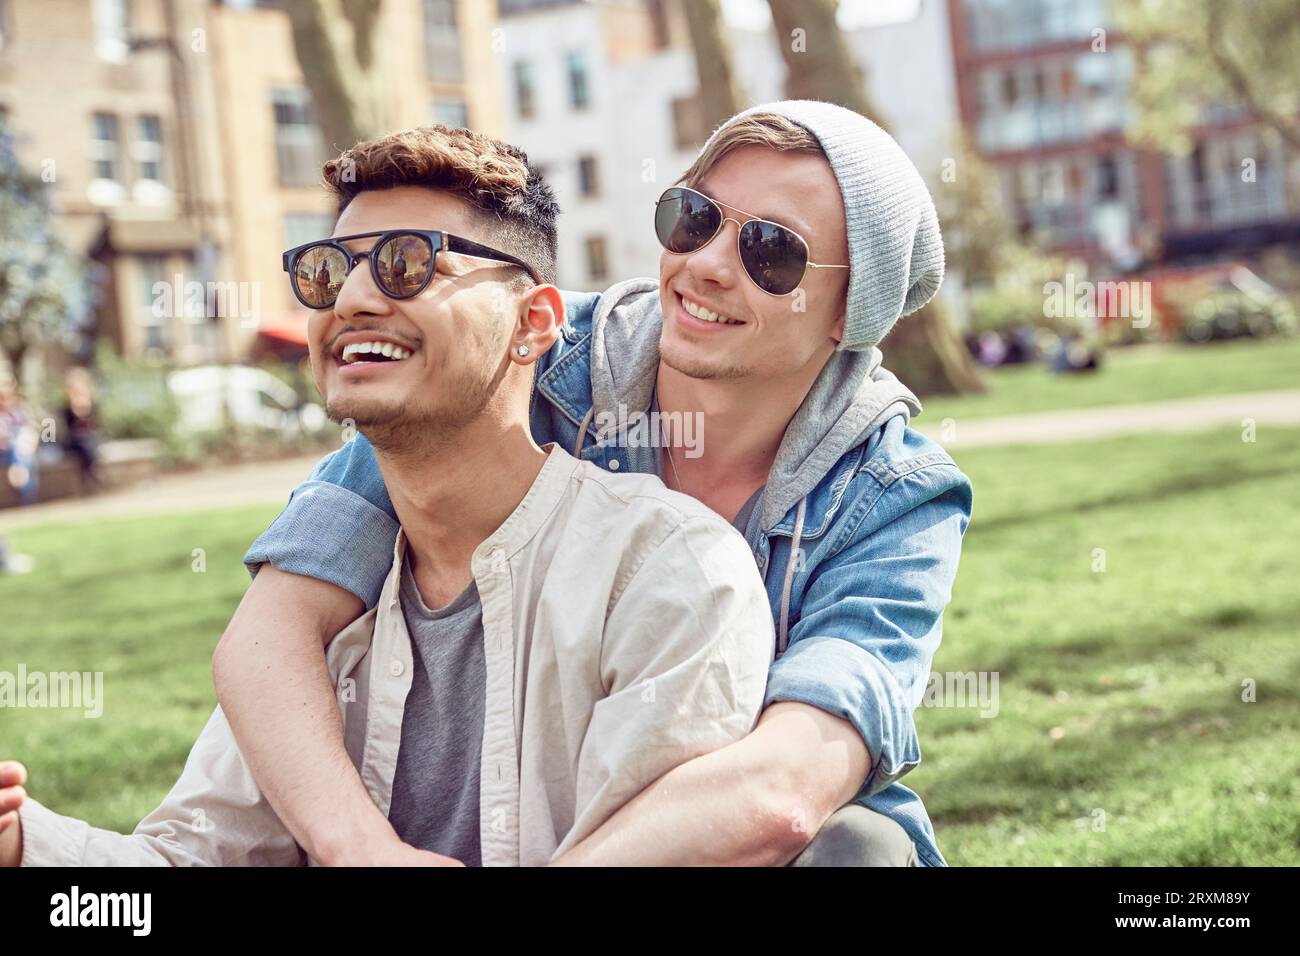 Gay couple sitting in park Banque D'Images